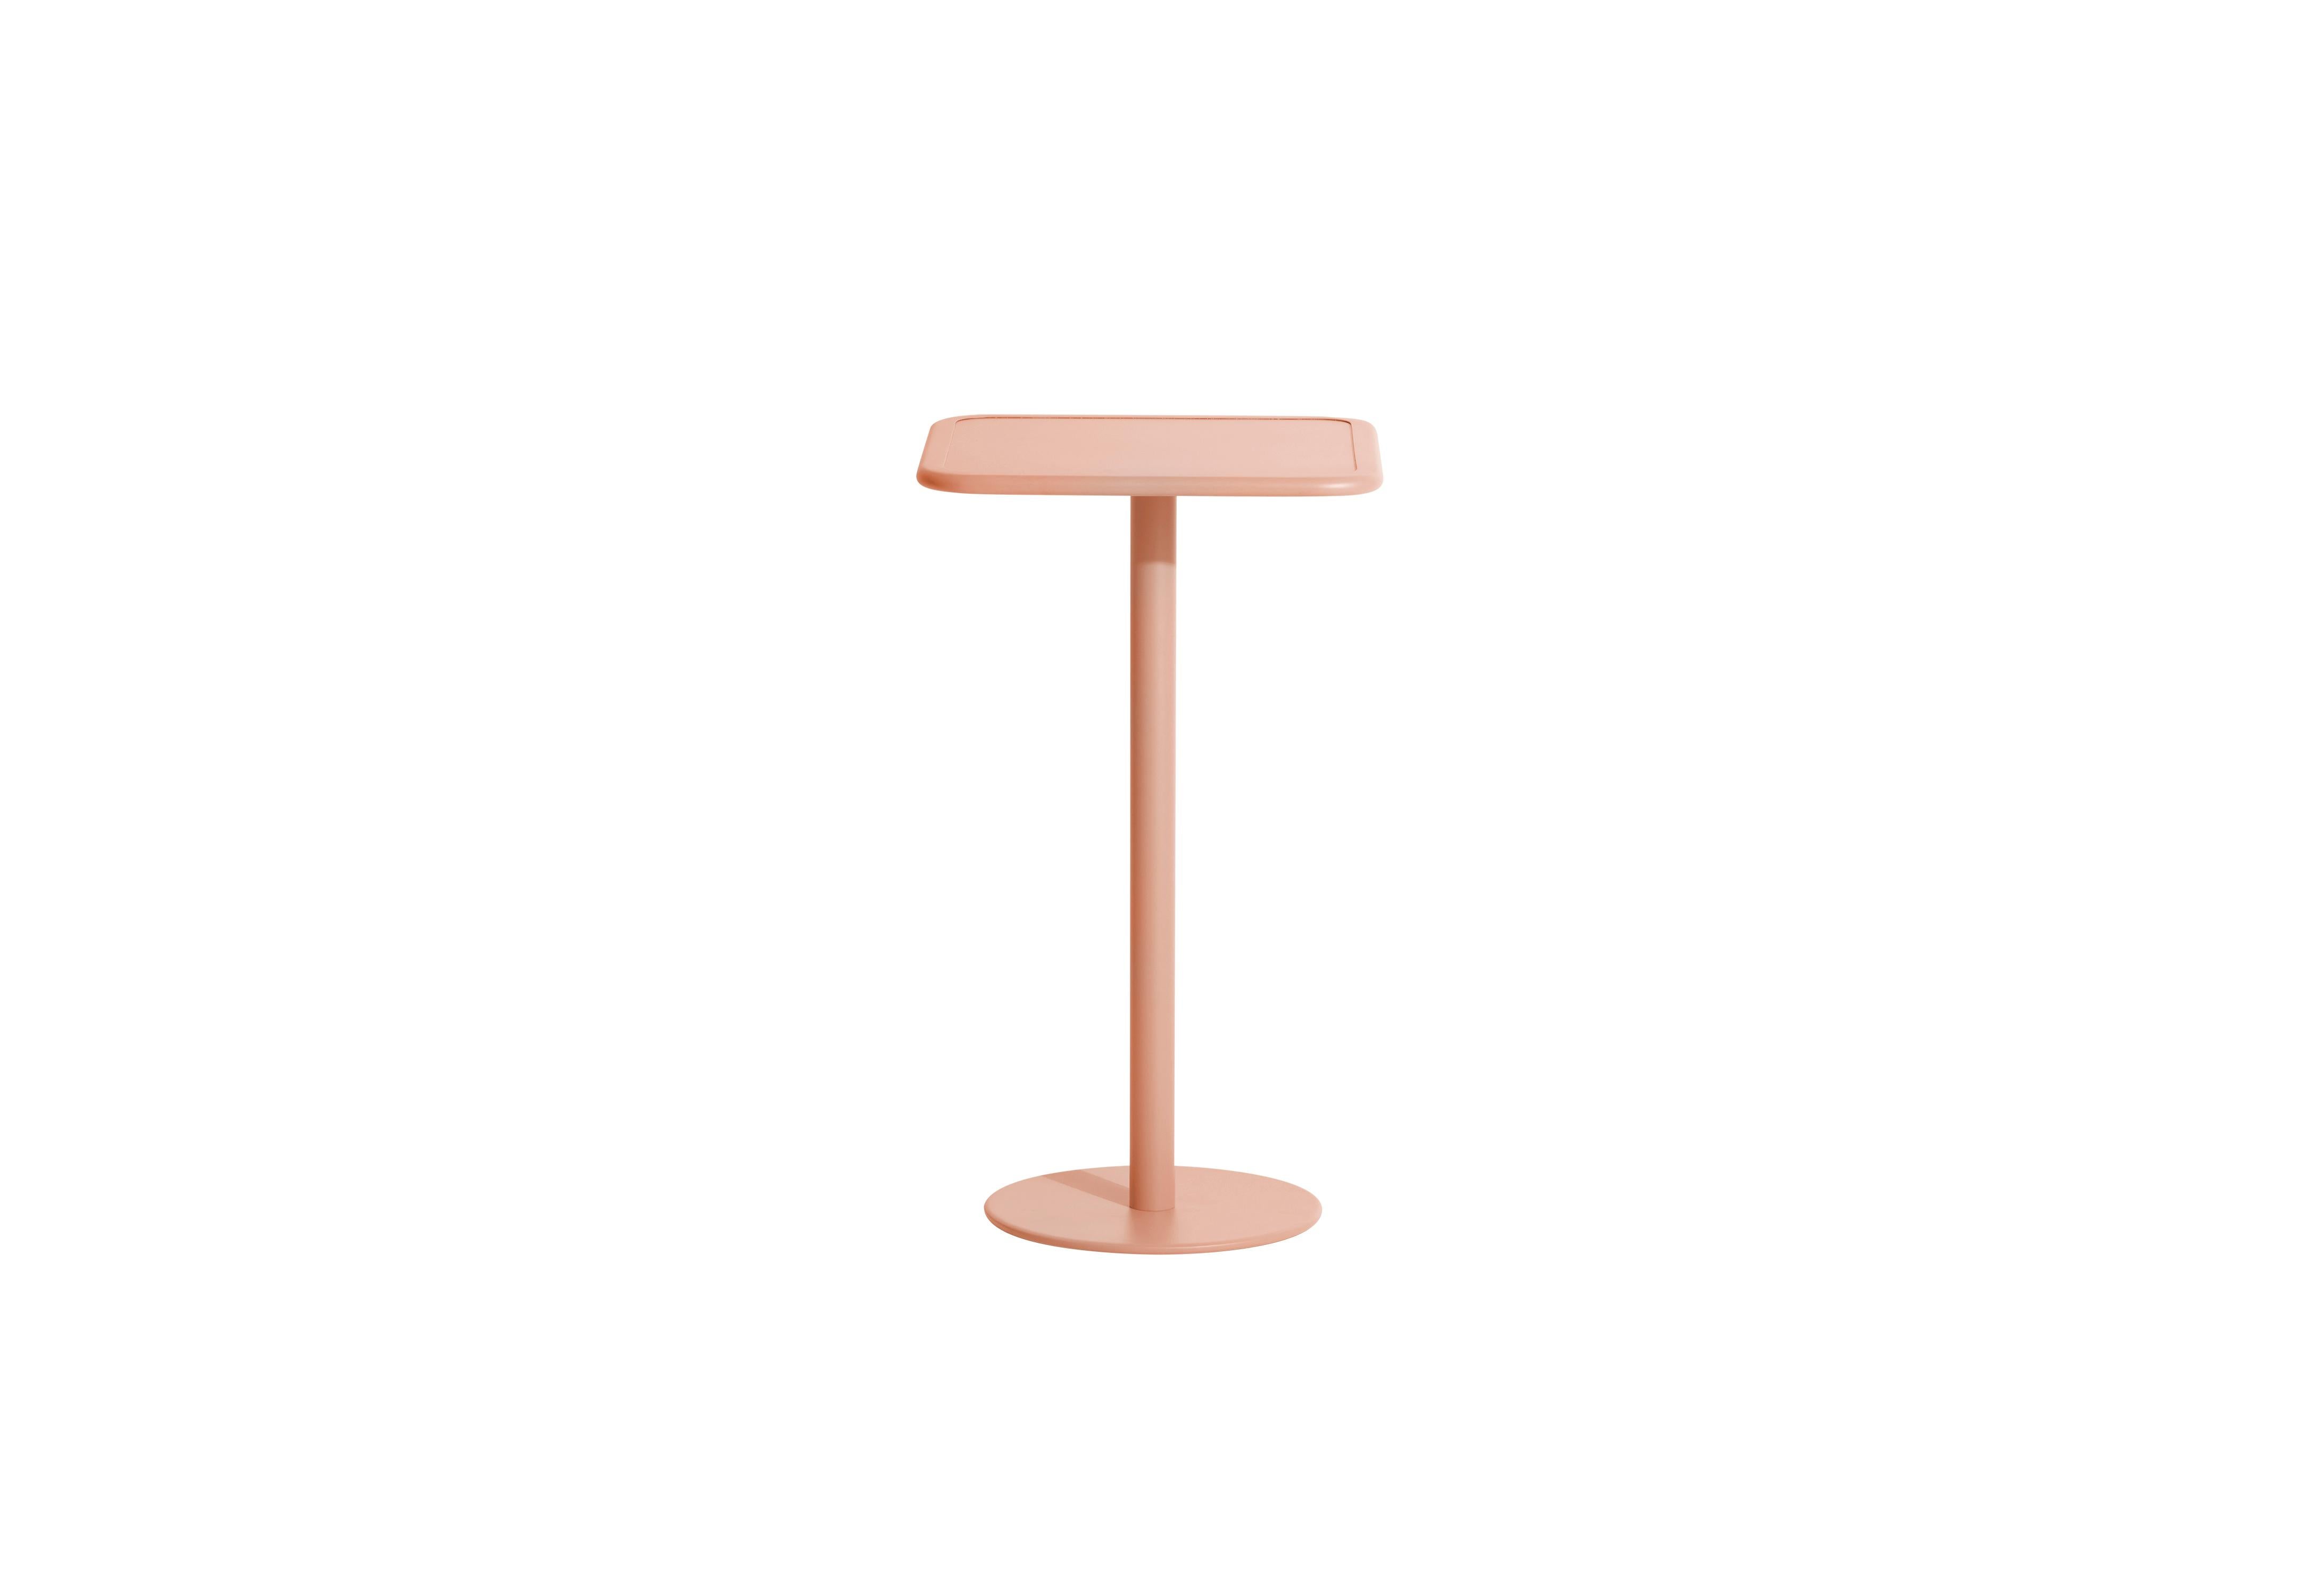 Petite Friture Week-End Square High Table in Blush Aluminium by Studio BrichetZiegler, 2017

The week-end collection is a full range of outdoor furniture, in aluminium grained epoxy paint, matt finish, that includes 18 functions and 8 colours for